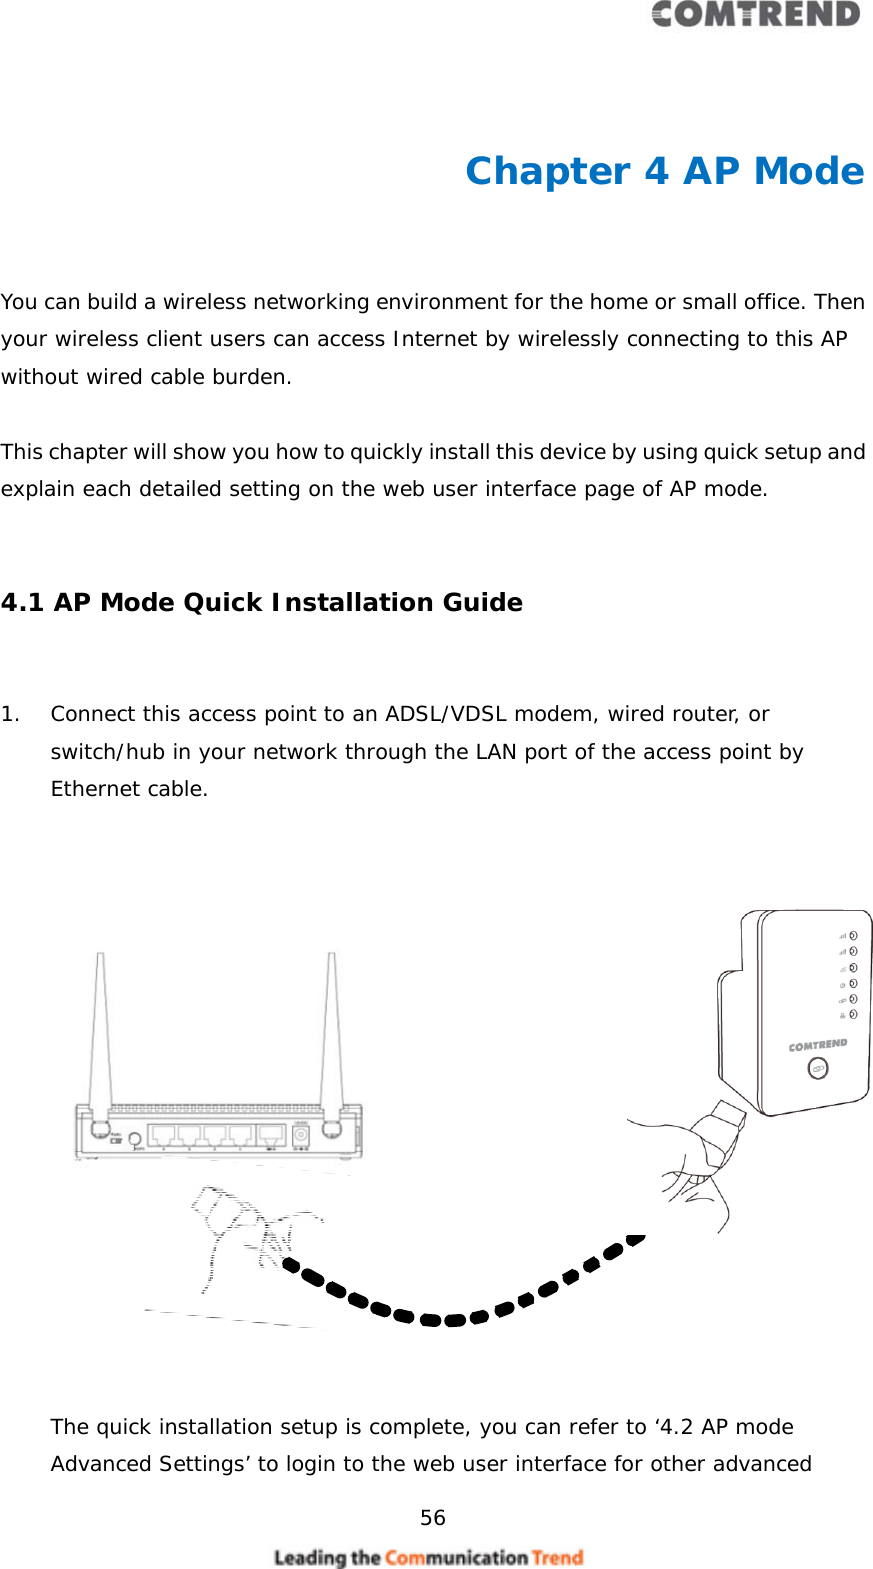     56   Chapter 4 AP Mode  You can build a wireless networking environment for the home or small office. Then your wireless client users can access Internet by wirelessly connecting to this AP without wired cable burden.   This chapter will show you how to quickly install this device by using quick setup and explain each detailed setting on the web user interface page of AP mode.   4.1 AP Mode Quick Installation Guide  1. Connect this access point to an ADSL/VDSL modem, wired router, or switch/hub in your network through the LAN port of the access point by Ethernet cable.                      The quick installation setup is complete, you can refer to ‘4.2 AP mode Advanced Settings’ to login to the web user interface for other advanced 